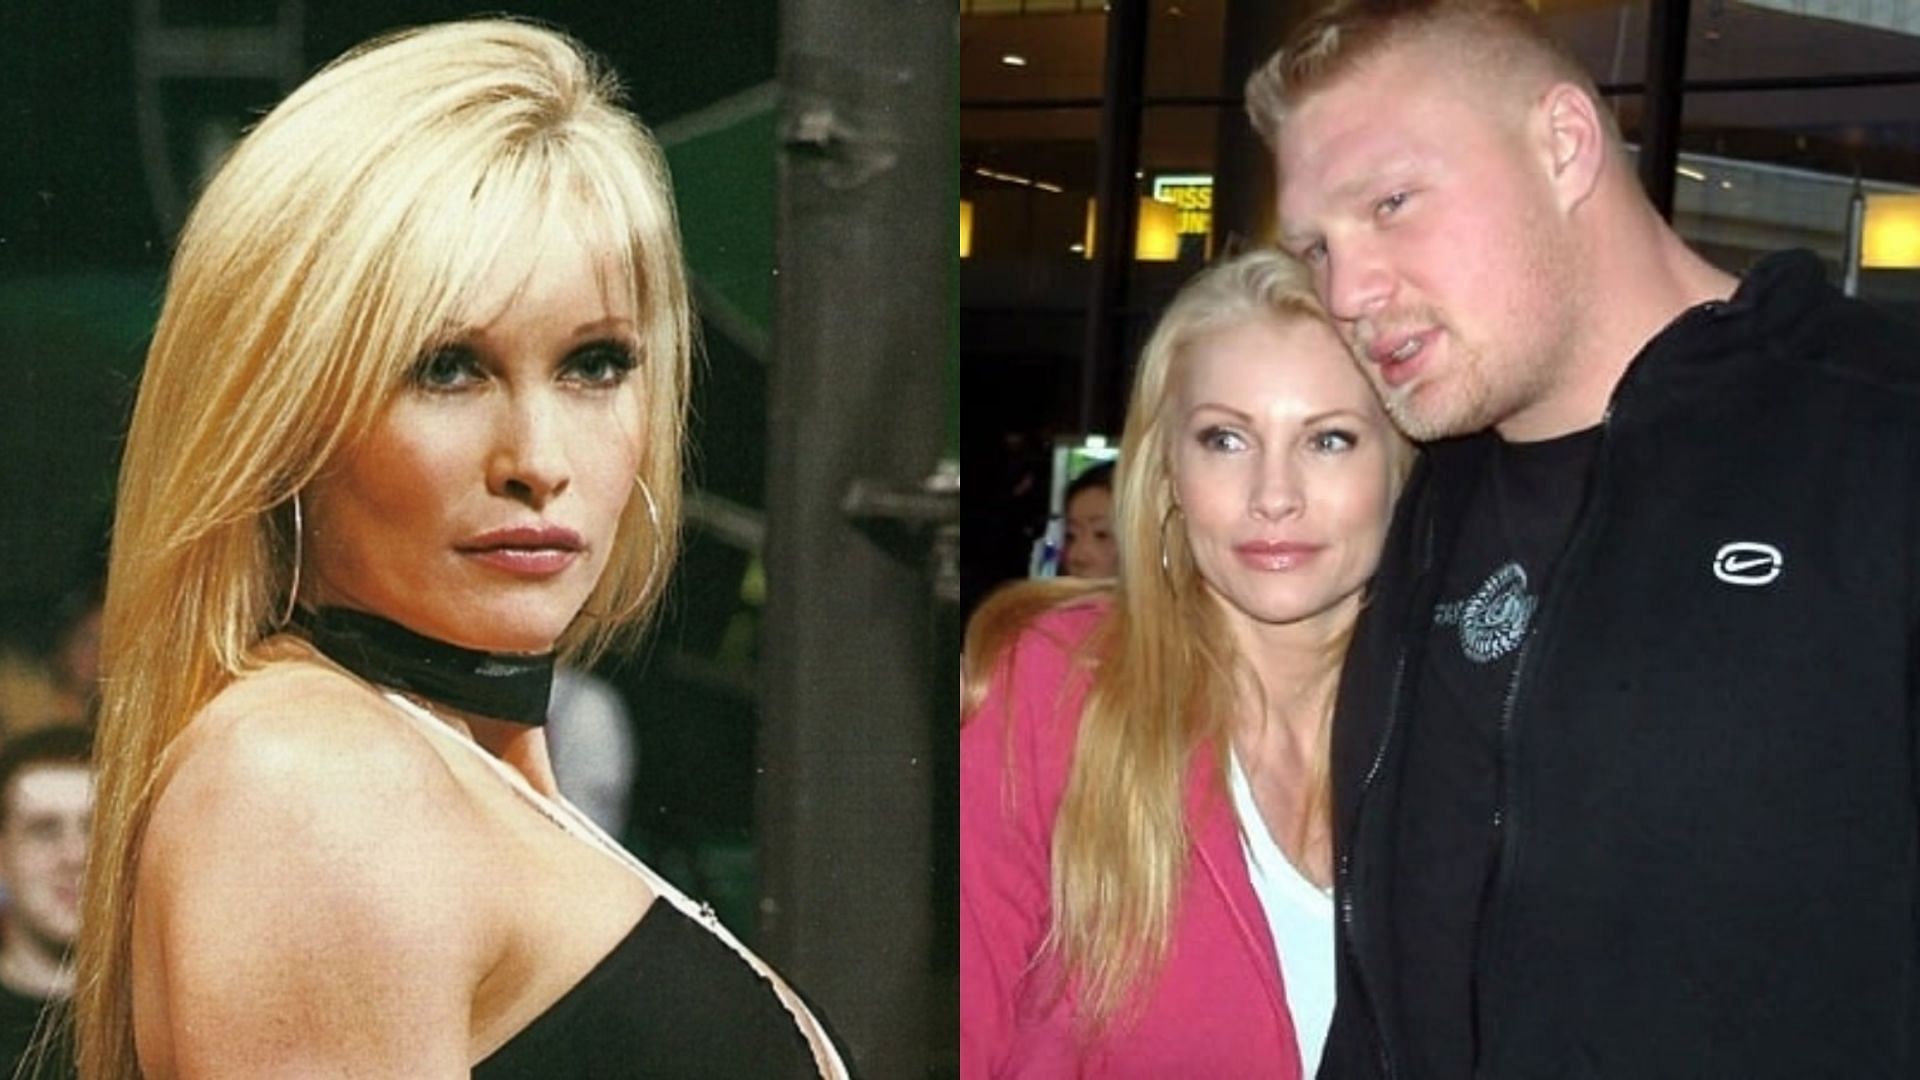 Sable is now married to WWE legend Brock Lesnar